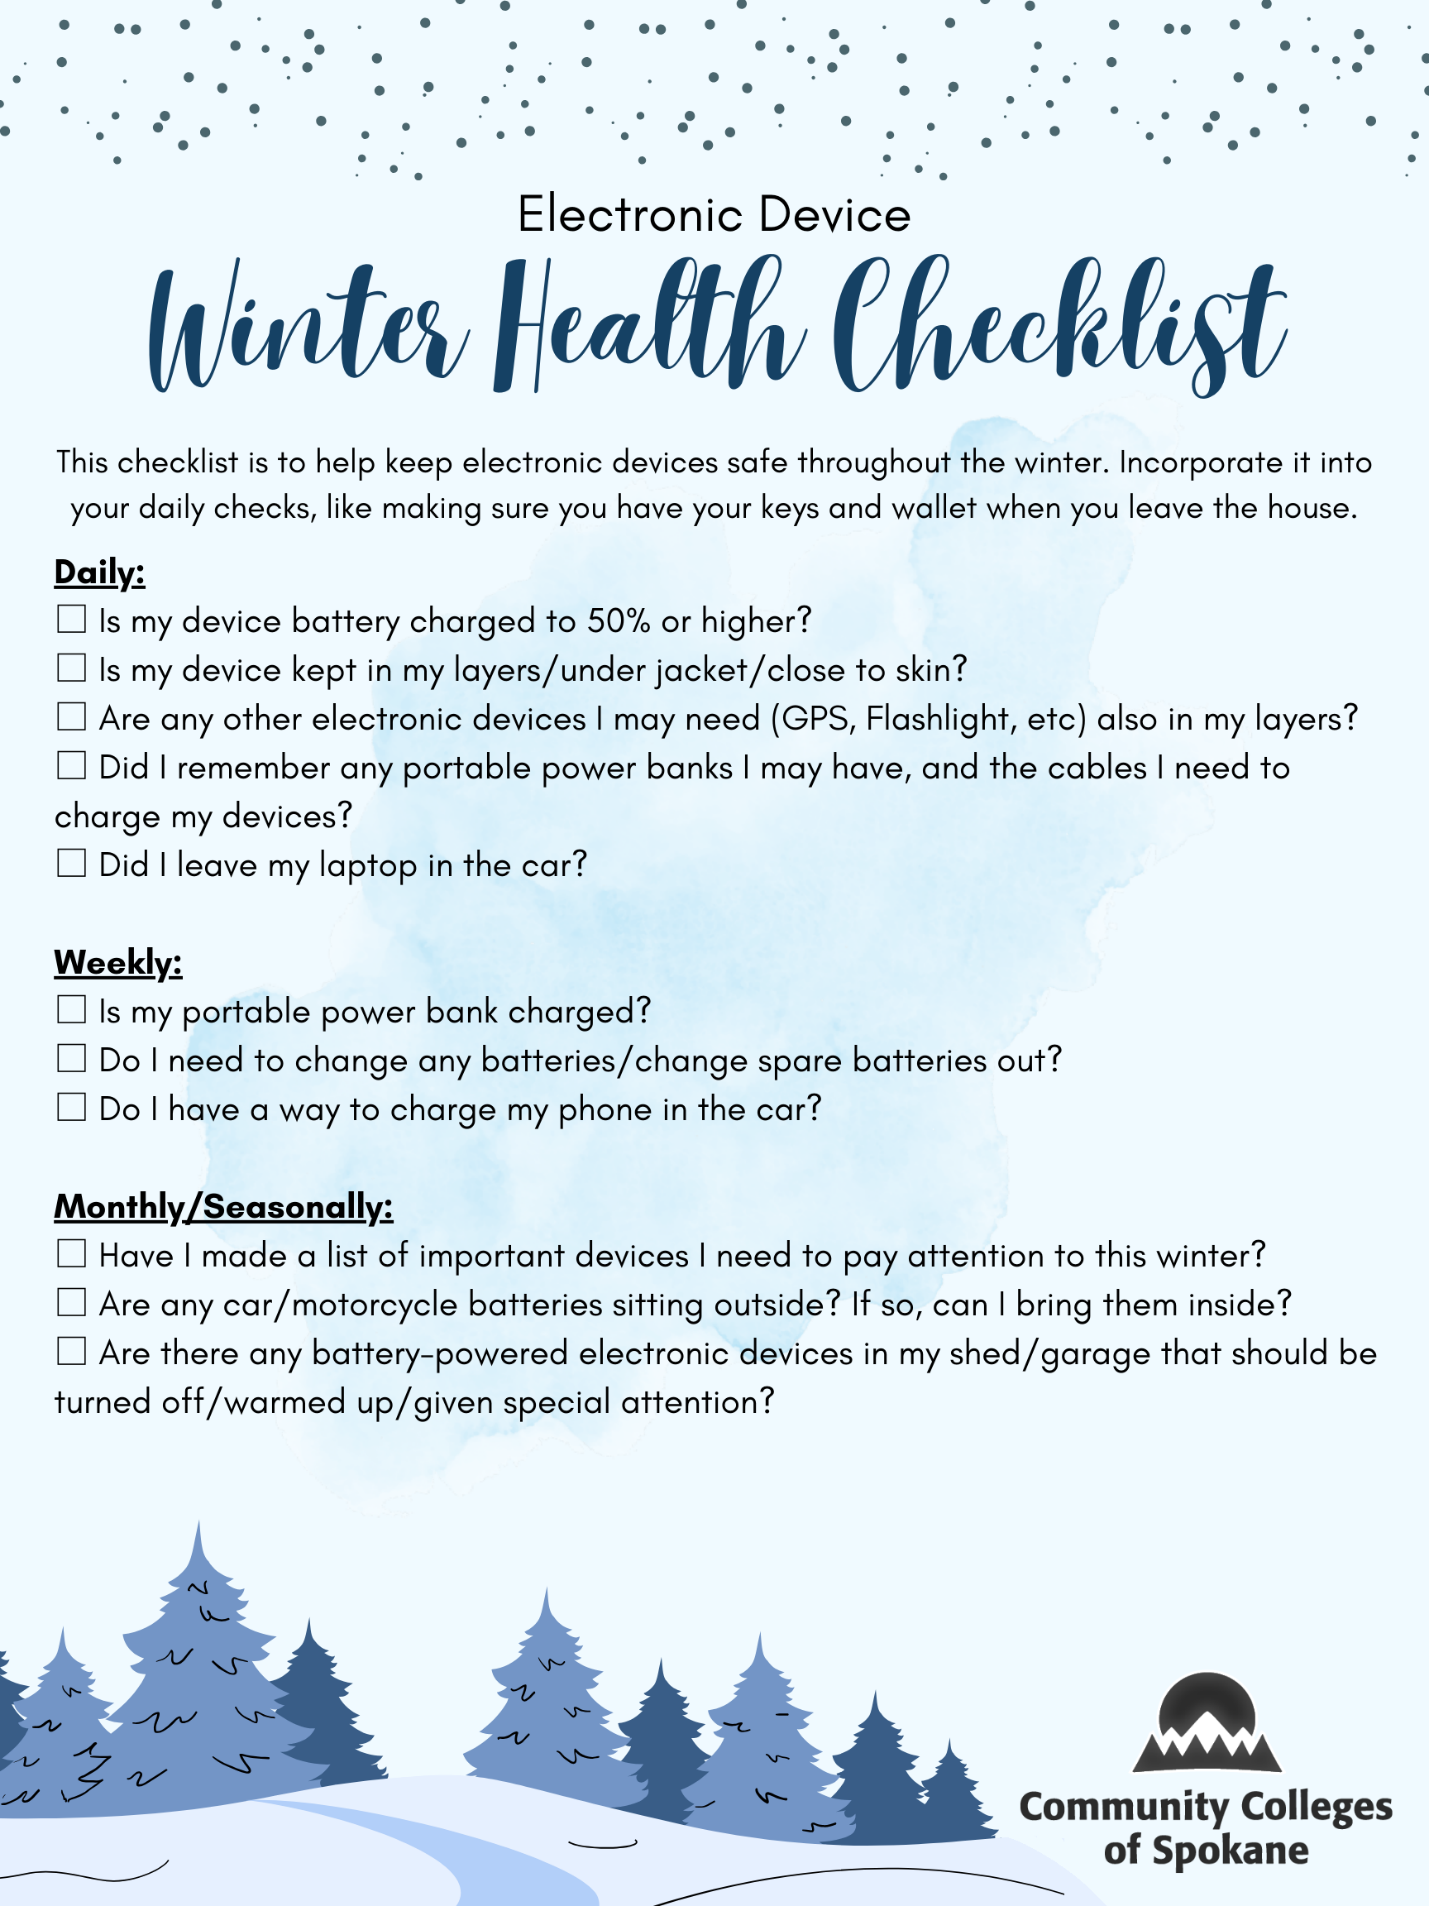 A checklist to help keep electronic devices safe through the winter.